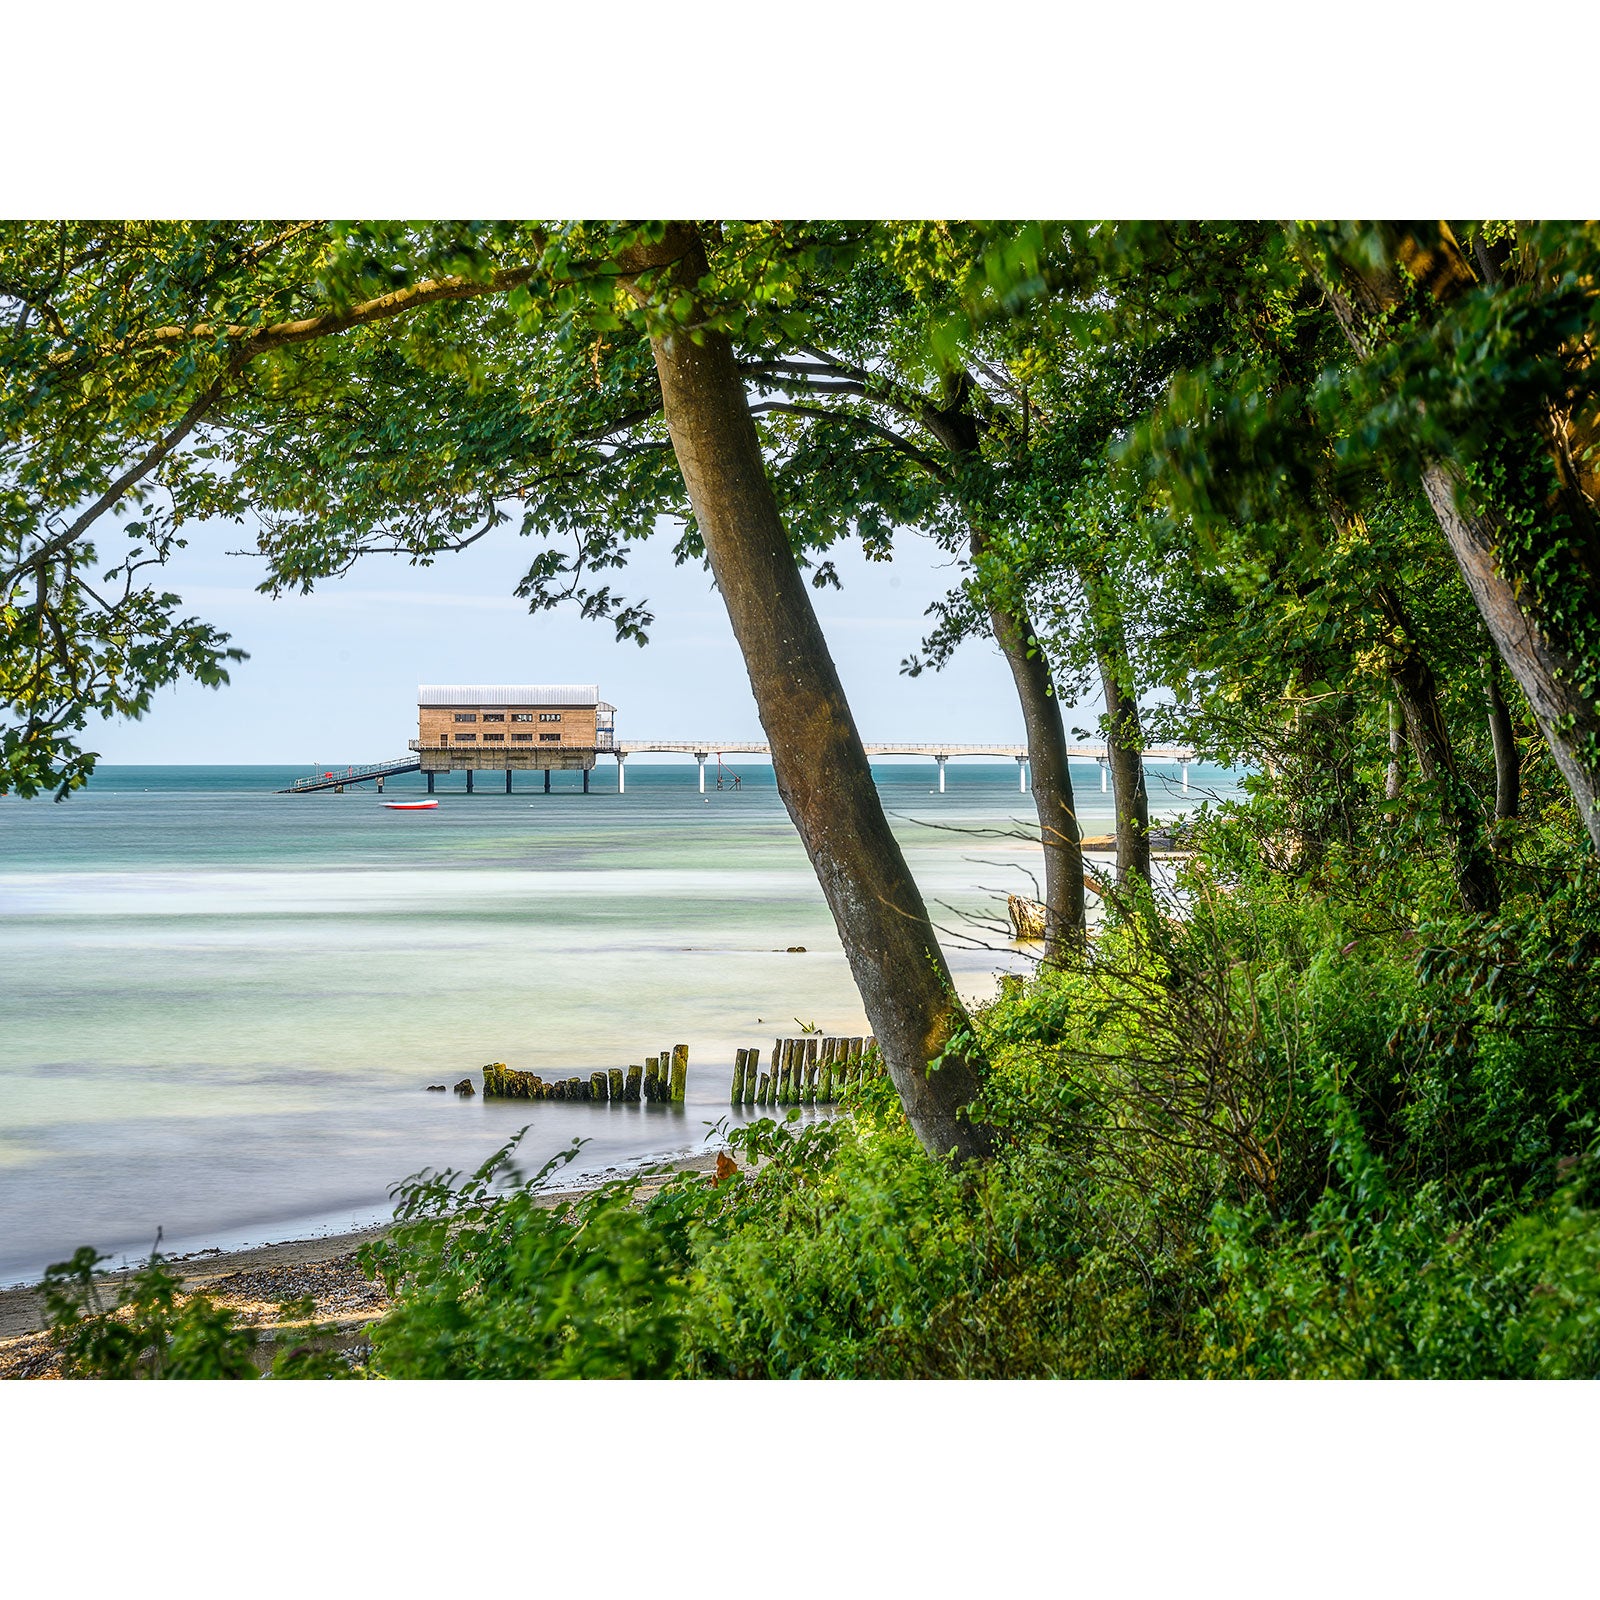 A tranquil coastal scene on Bembridge Beach on the Isle of Wight with lush greenery foregrounding a pier extending into calm waters, with a building structure at the end, captured by Available Light Photography.